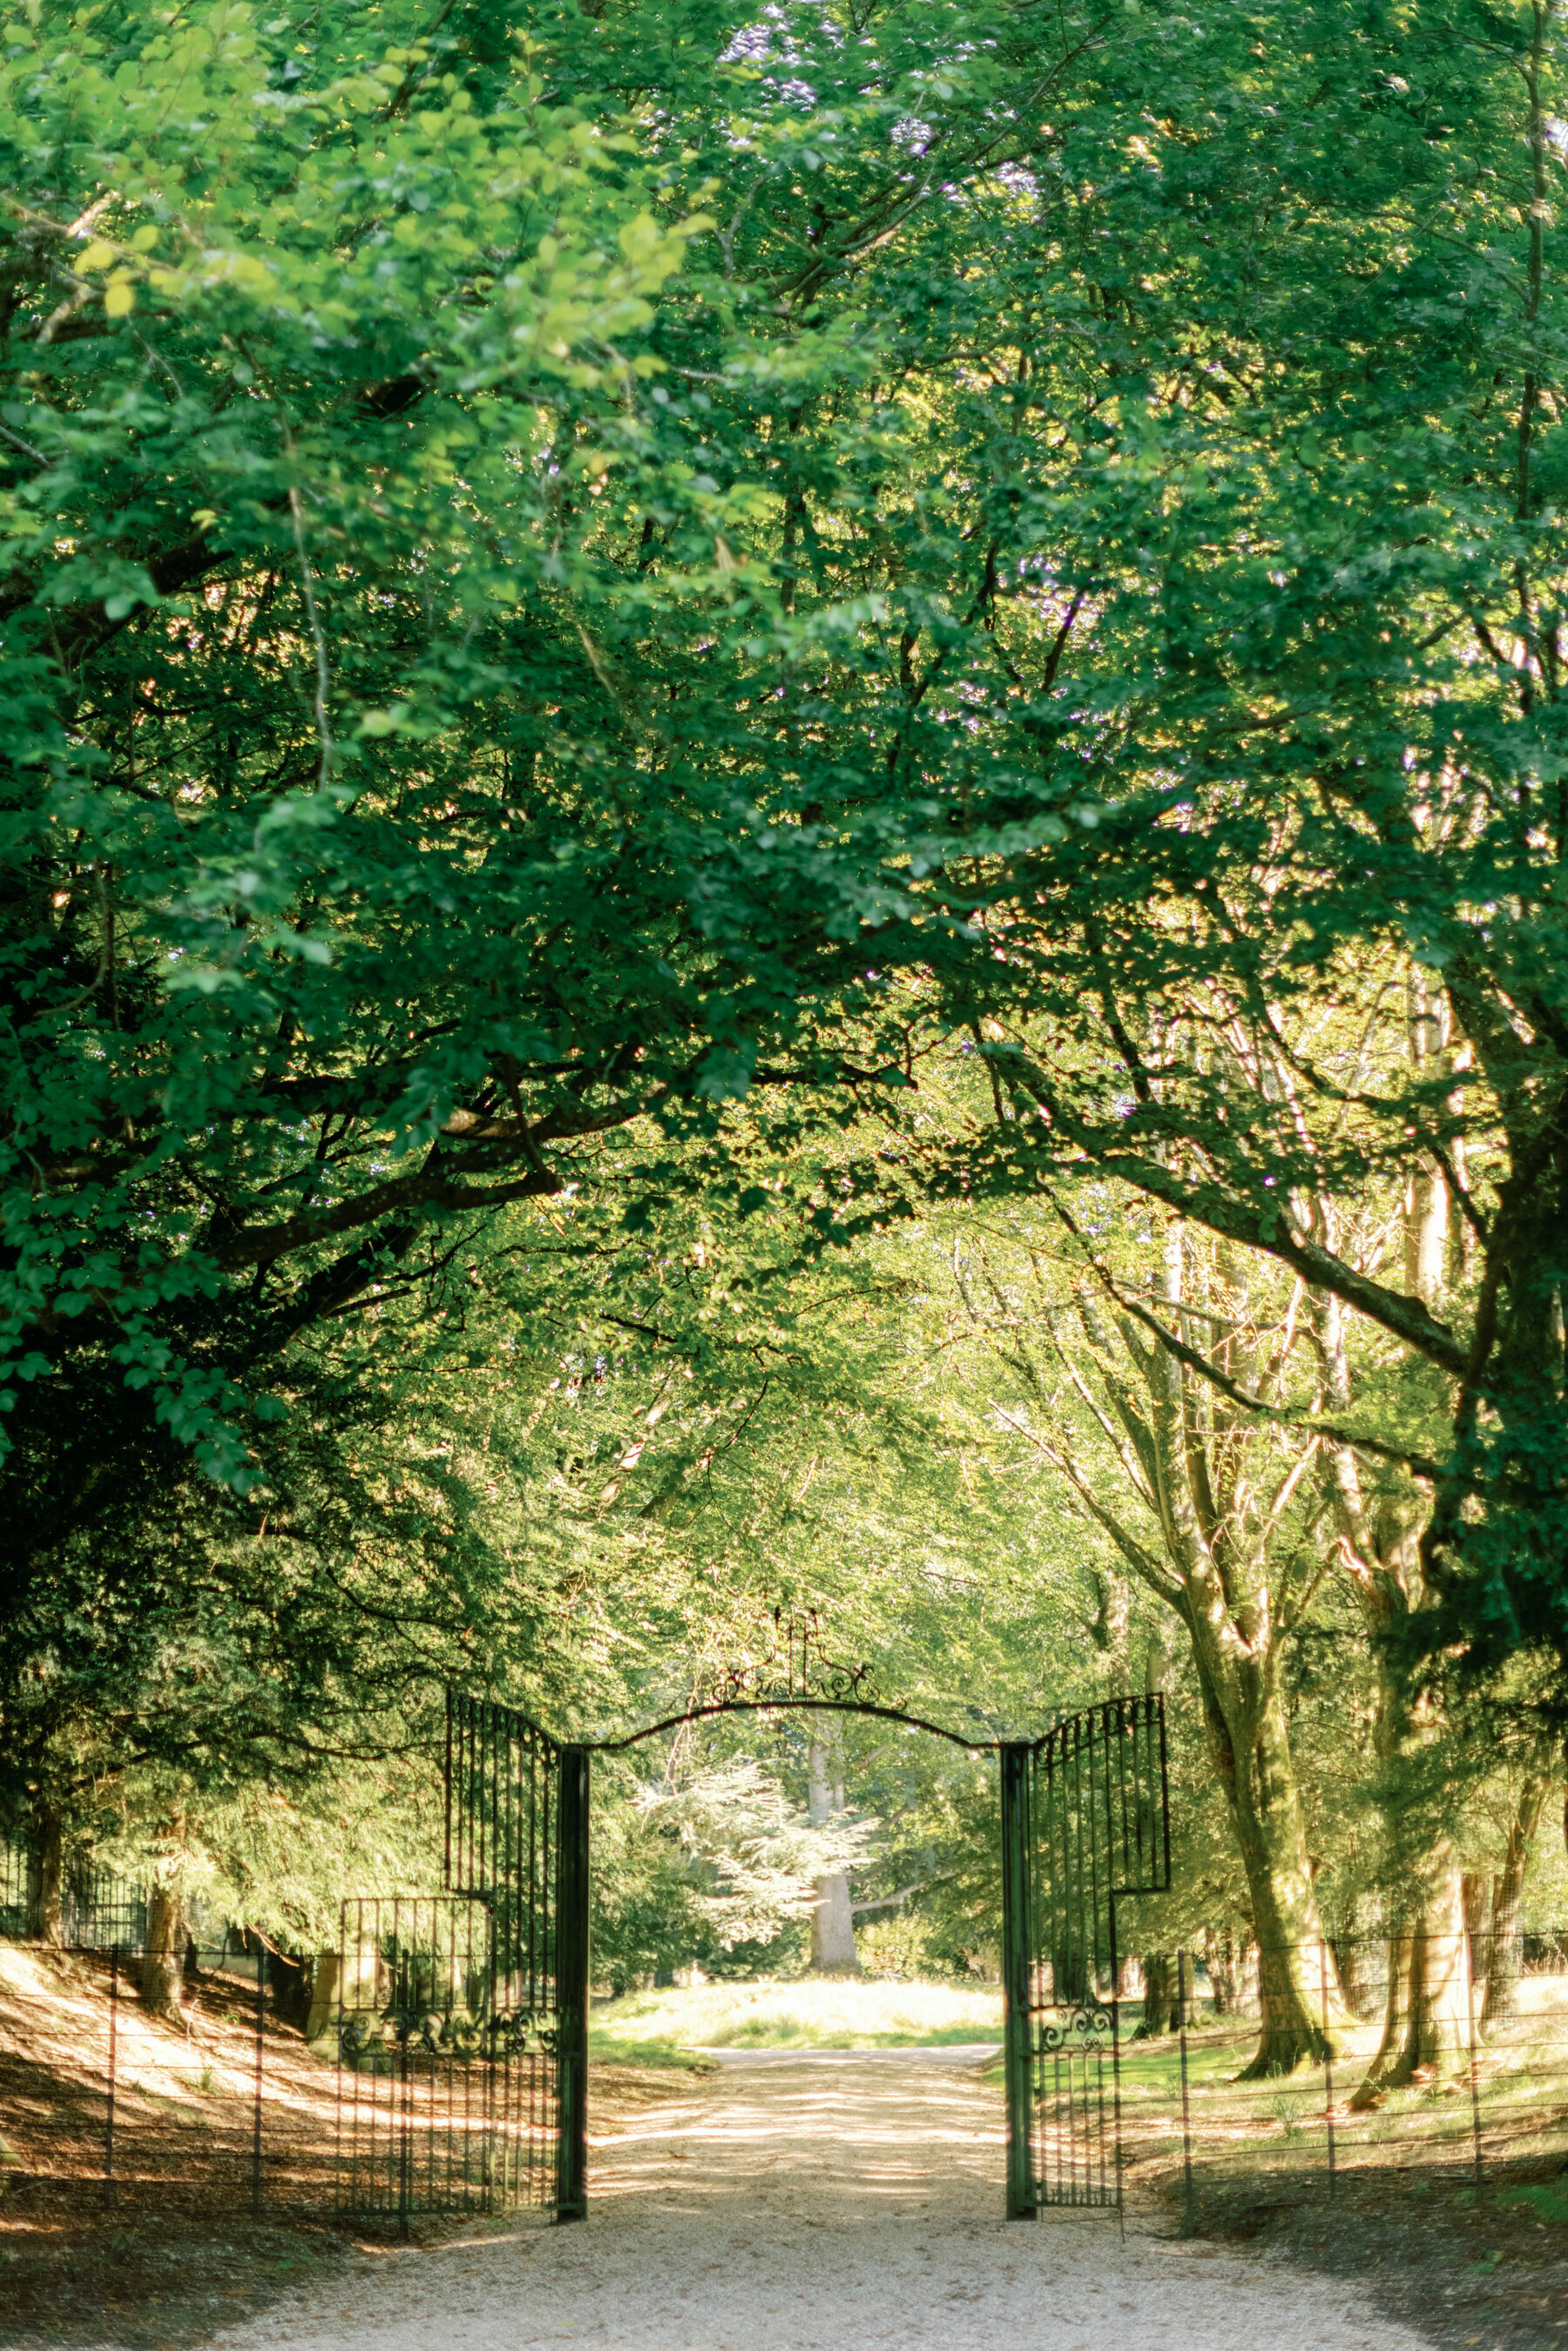 Gates to the Dower House